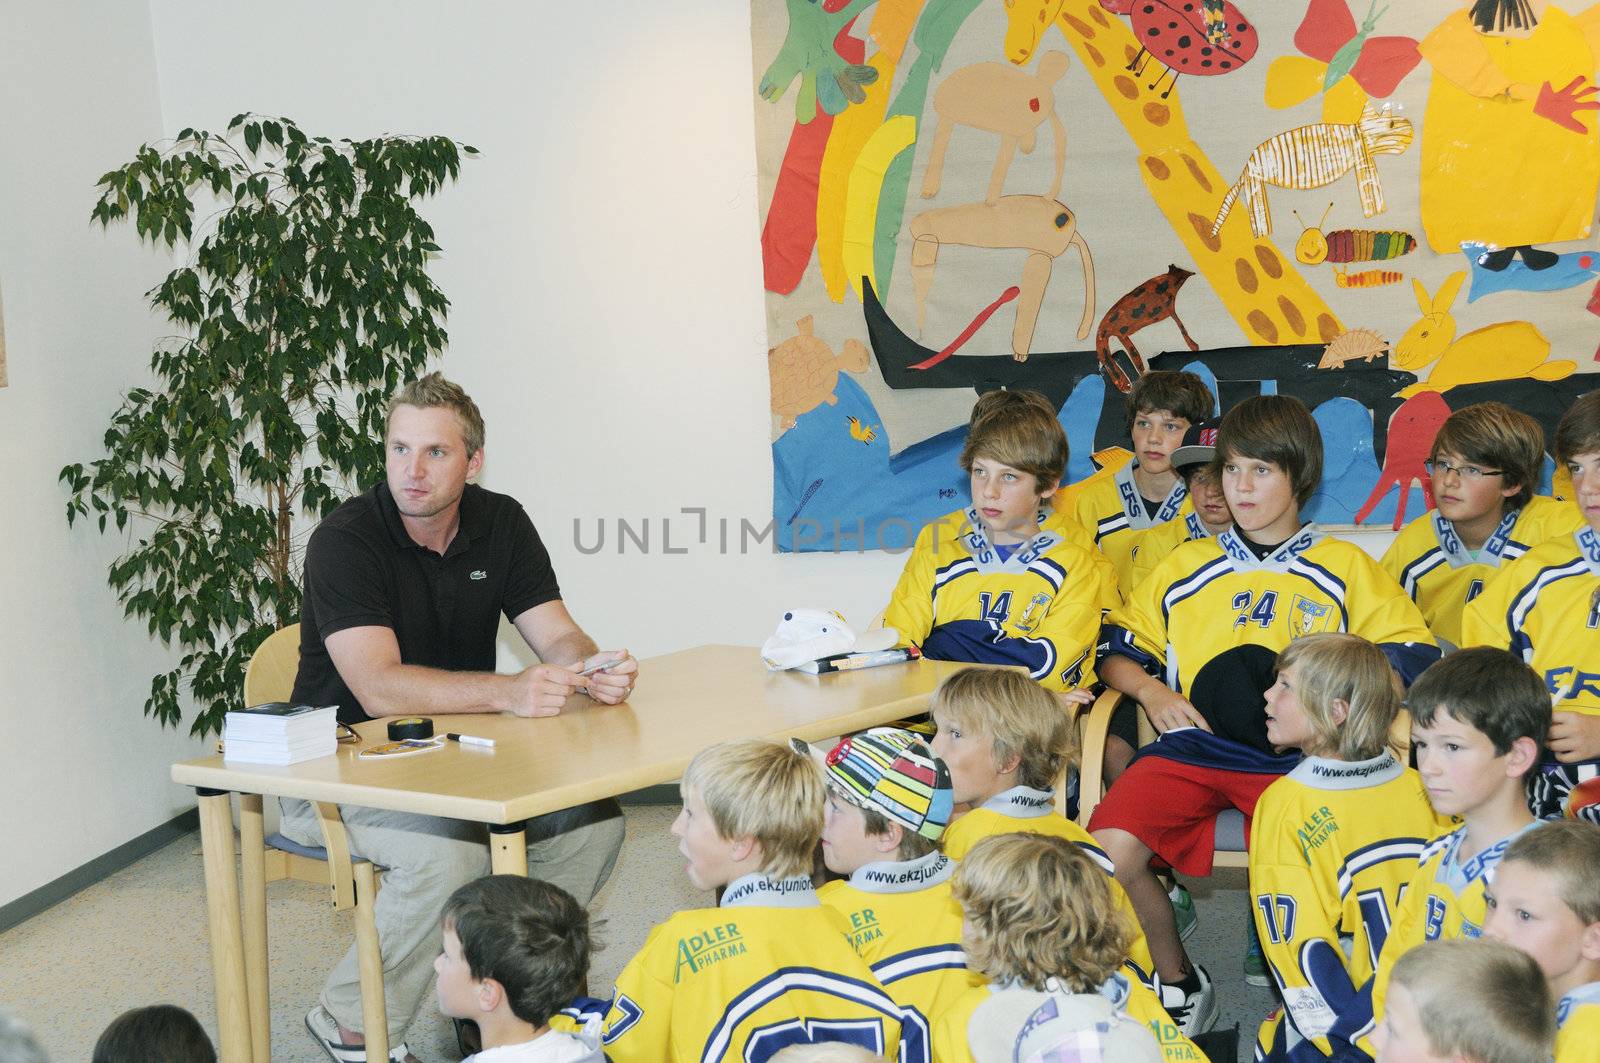 Zell am See, Austria - Jul 8. NHL star player Thomas Vanek visits his hometown Zell am See in Austria on 8th July 2010, to speak to young players of Zell am See and giving autographs.